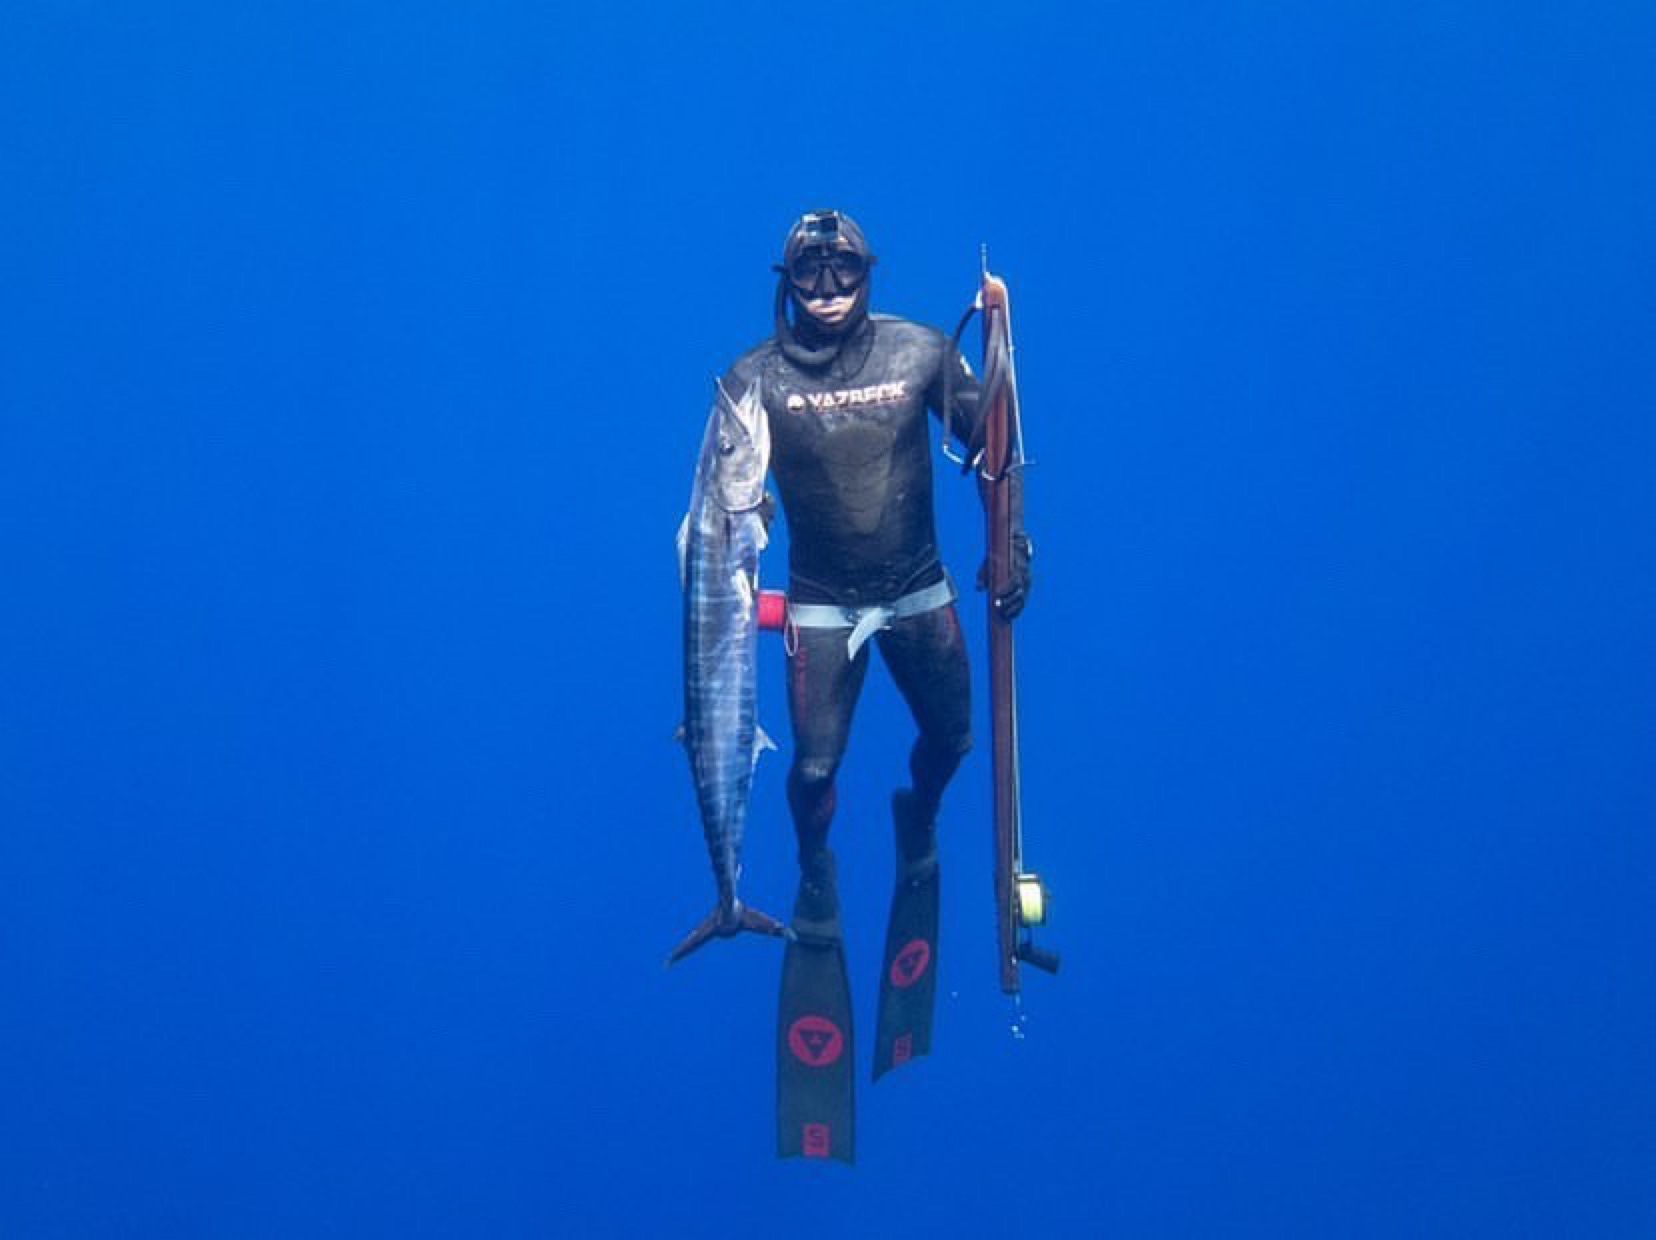 spearfishing in hawaii using alchemy s30 carbon fins